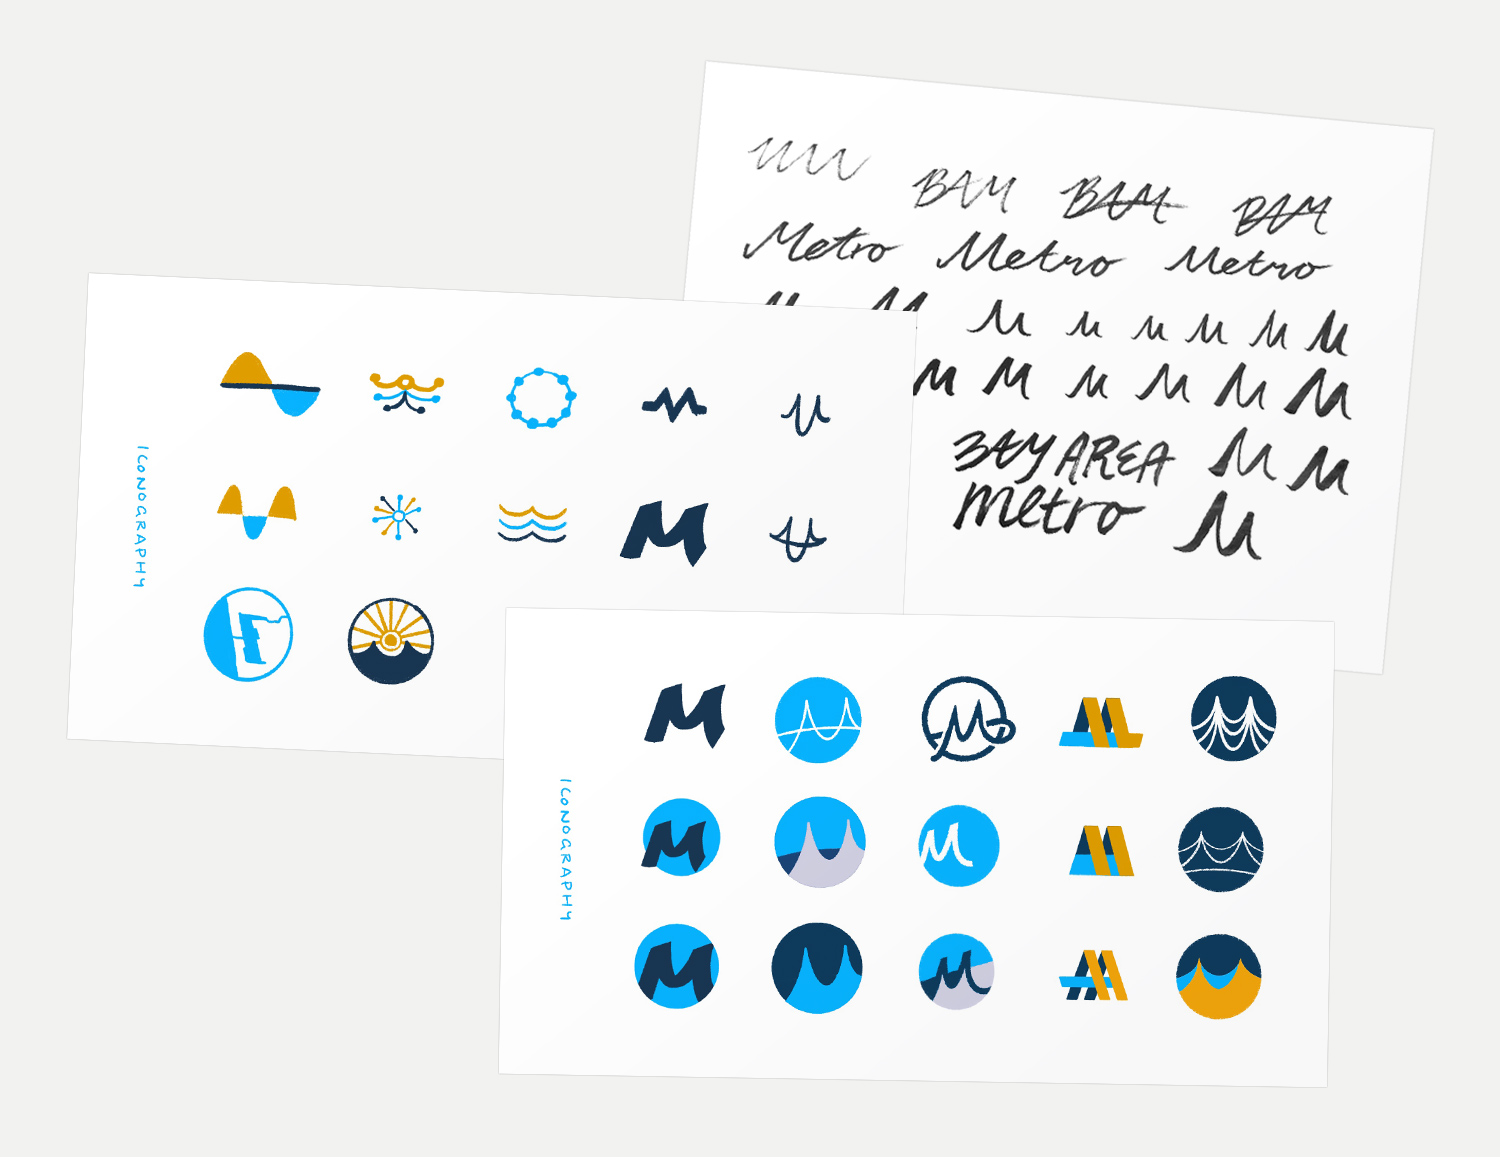 A collection of logo sketches inspired by transit motifs and the San Francisco Bay Area